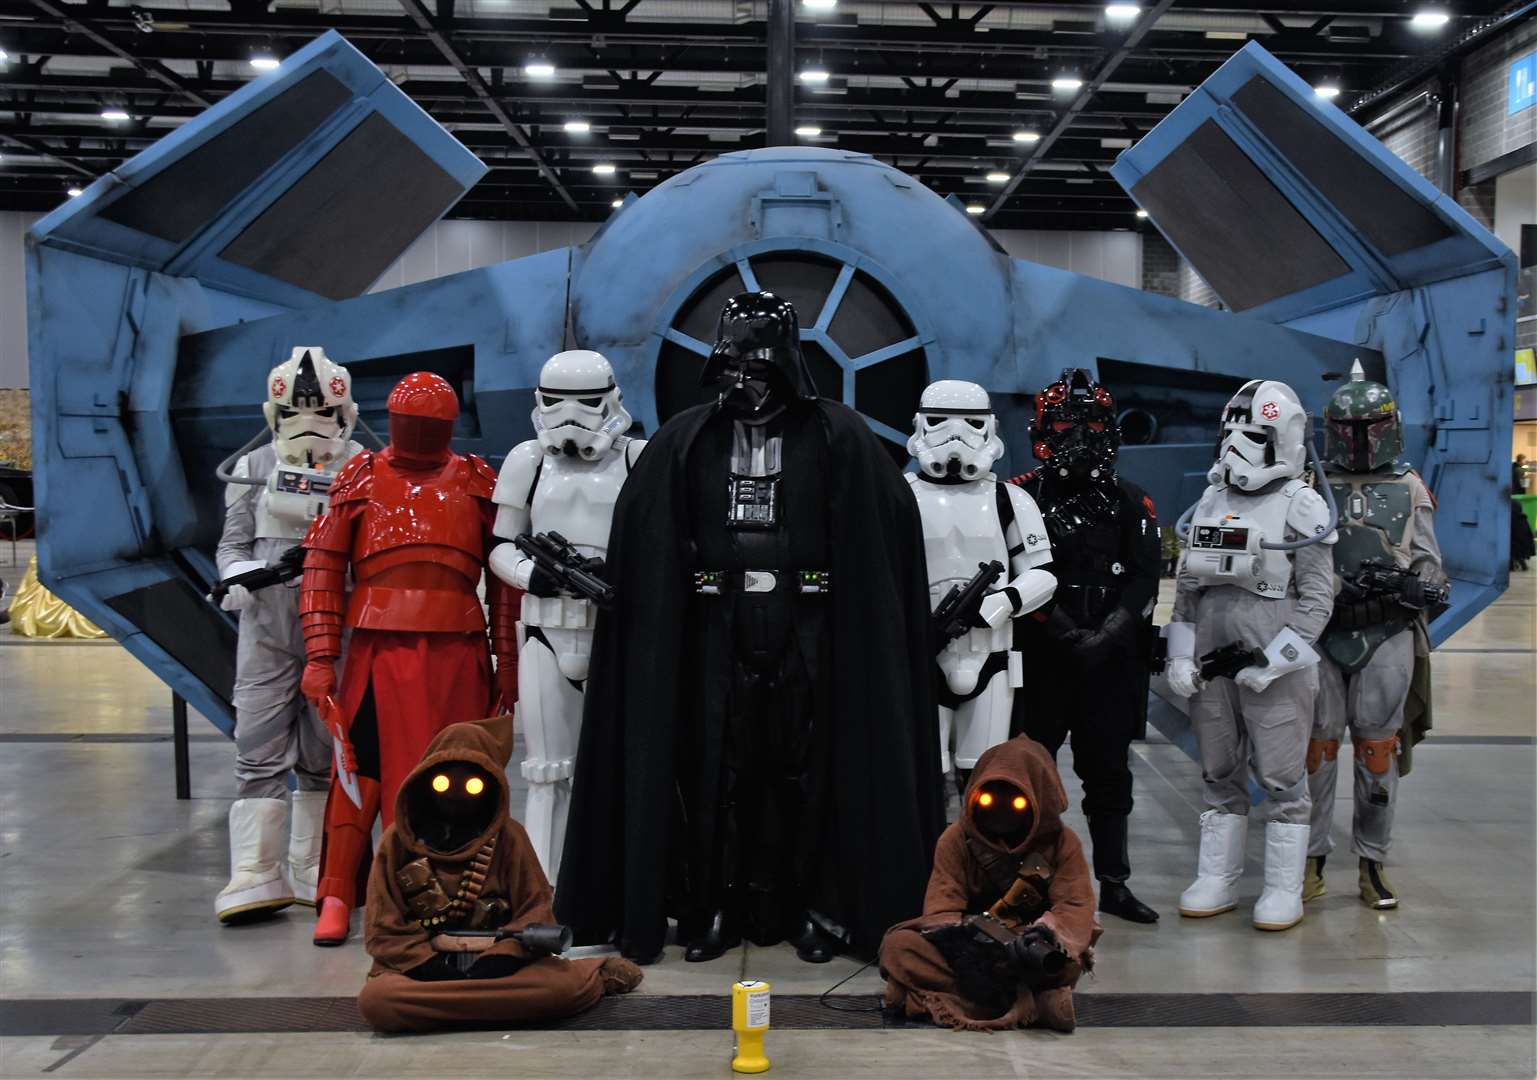 Feel the force of Comic Con.